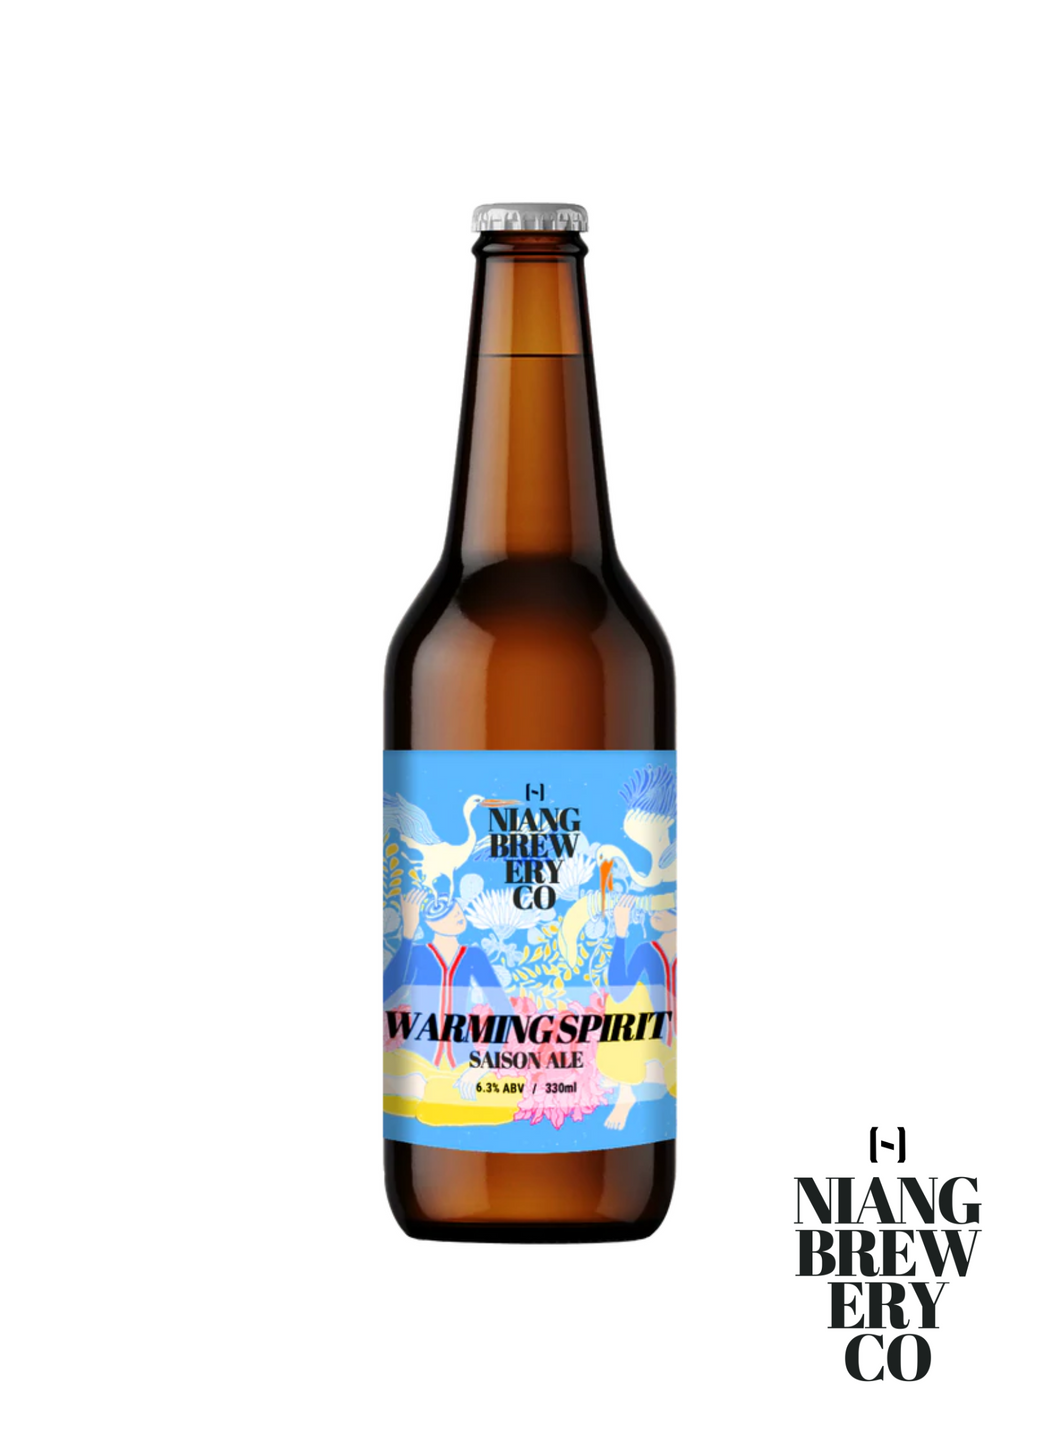 Niang Brewery Co: Warming Spirit - Saison Ale, 6.3% (330ml x 6 Bottles and Above)